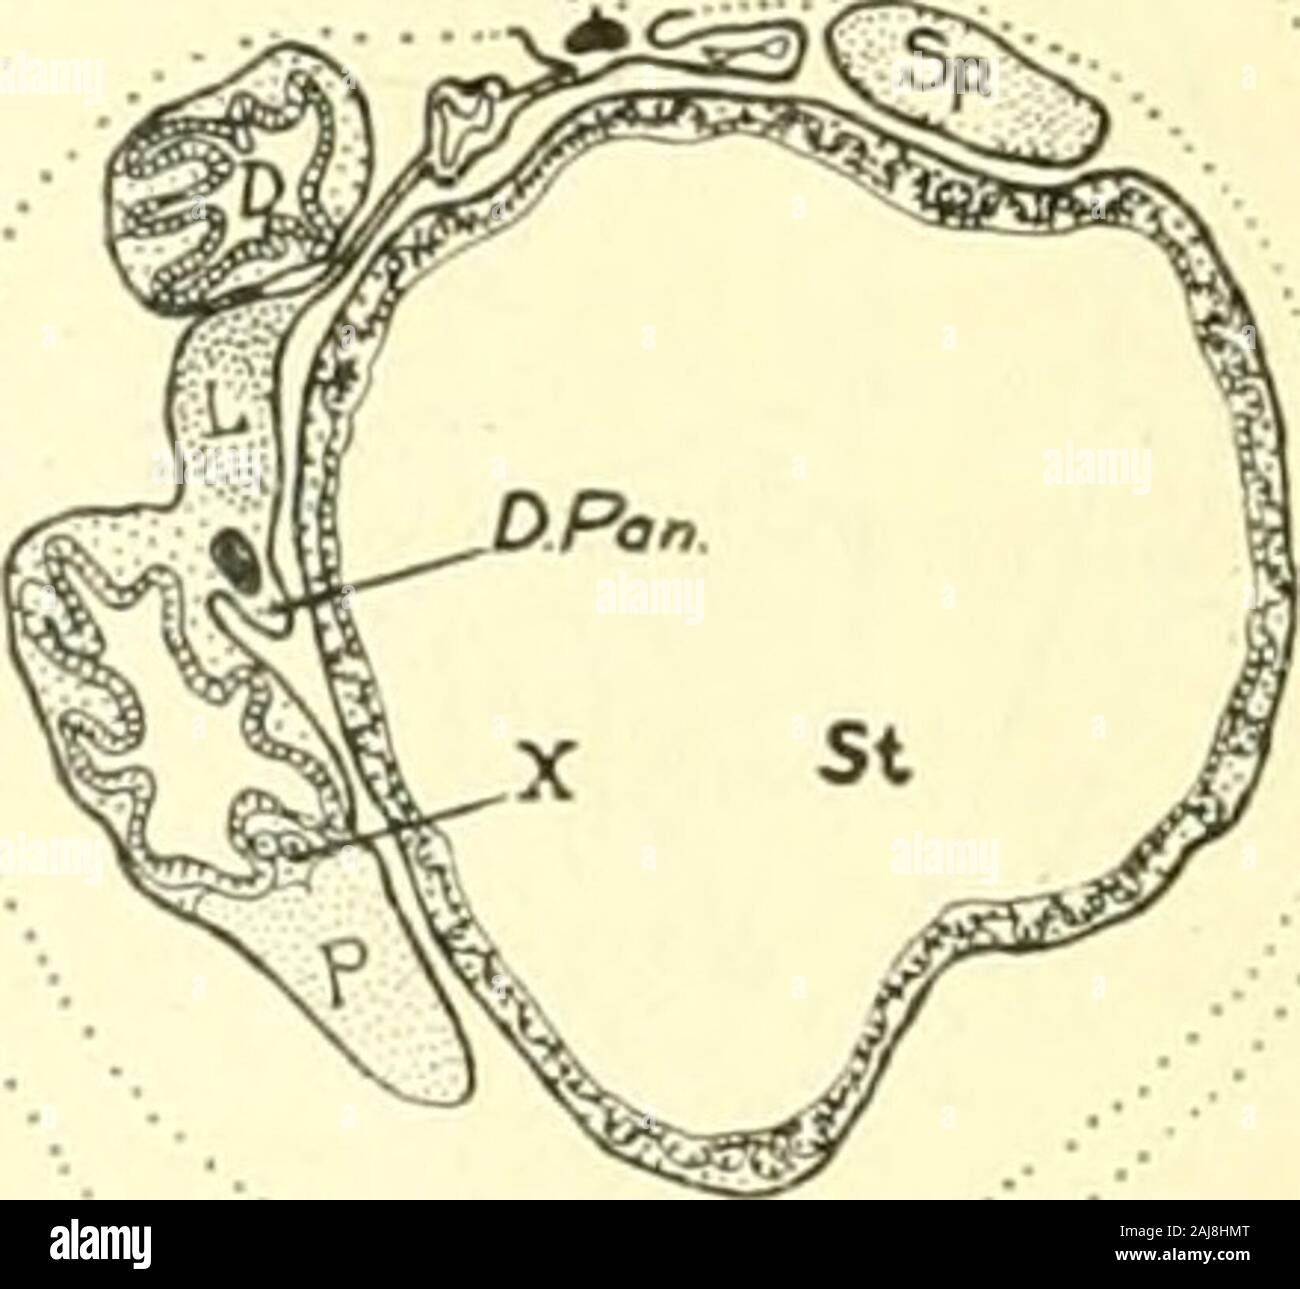 The American journal of anatomy . 7C Fig. 7 A series of transverse sections in the region of the liver. A, embryoof 13.5 mm. X 20; B, embryo of 20 mm. X 15; C, embryo of 35 mm. X 10;G.b., gall-bladder; L, liver; P., pancreas; Sp., spleen; St., stomach; x, ostiaof ductus choledochus into gut. At level of an-terior end ofliver About midwaybetween firstand 1 hirddrawing Anterior end ofgall bladder Level ofattach-ment ofcysticduct to Level of osti-um of ductuscholedochus A 13.5 - - Fig. 9 Fig. 8 Fig. 10Fig. 11Fig. 12 gallbladder B 20 ^^ C 3) 1^ 224 DEVELOPMENT OF LIVER AND PANCREAS 225 movement. T Stock Photo